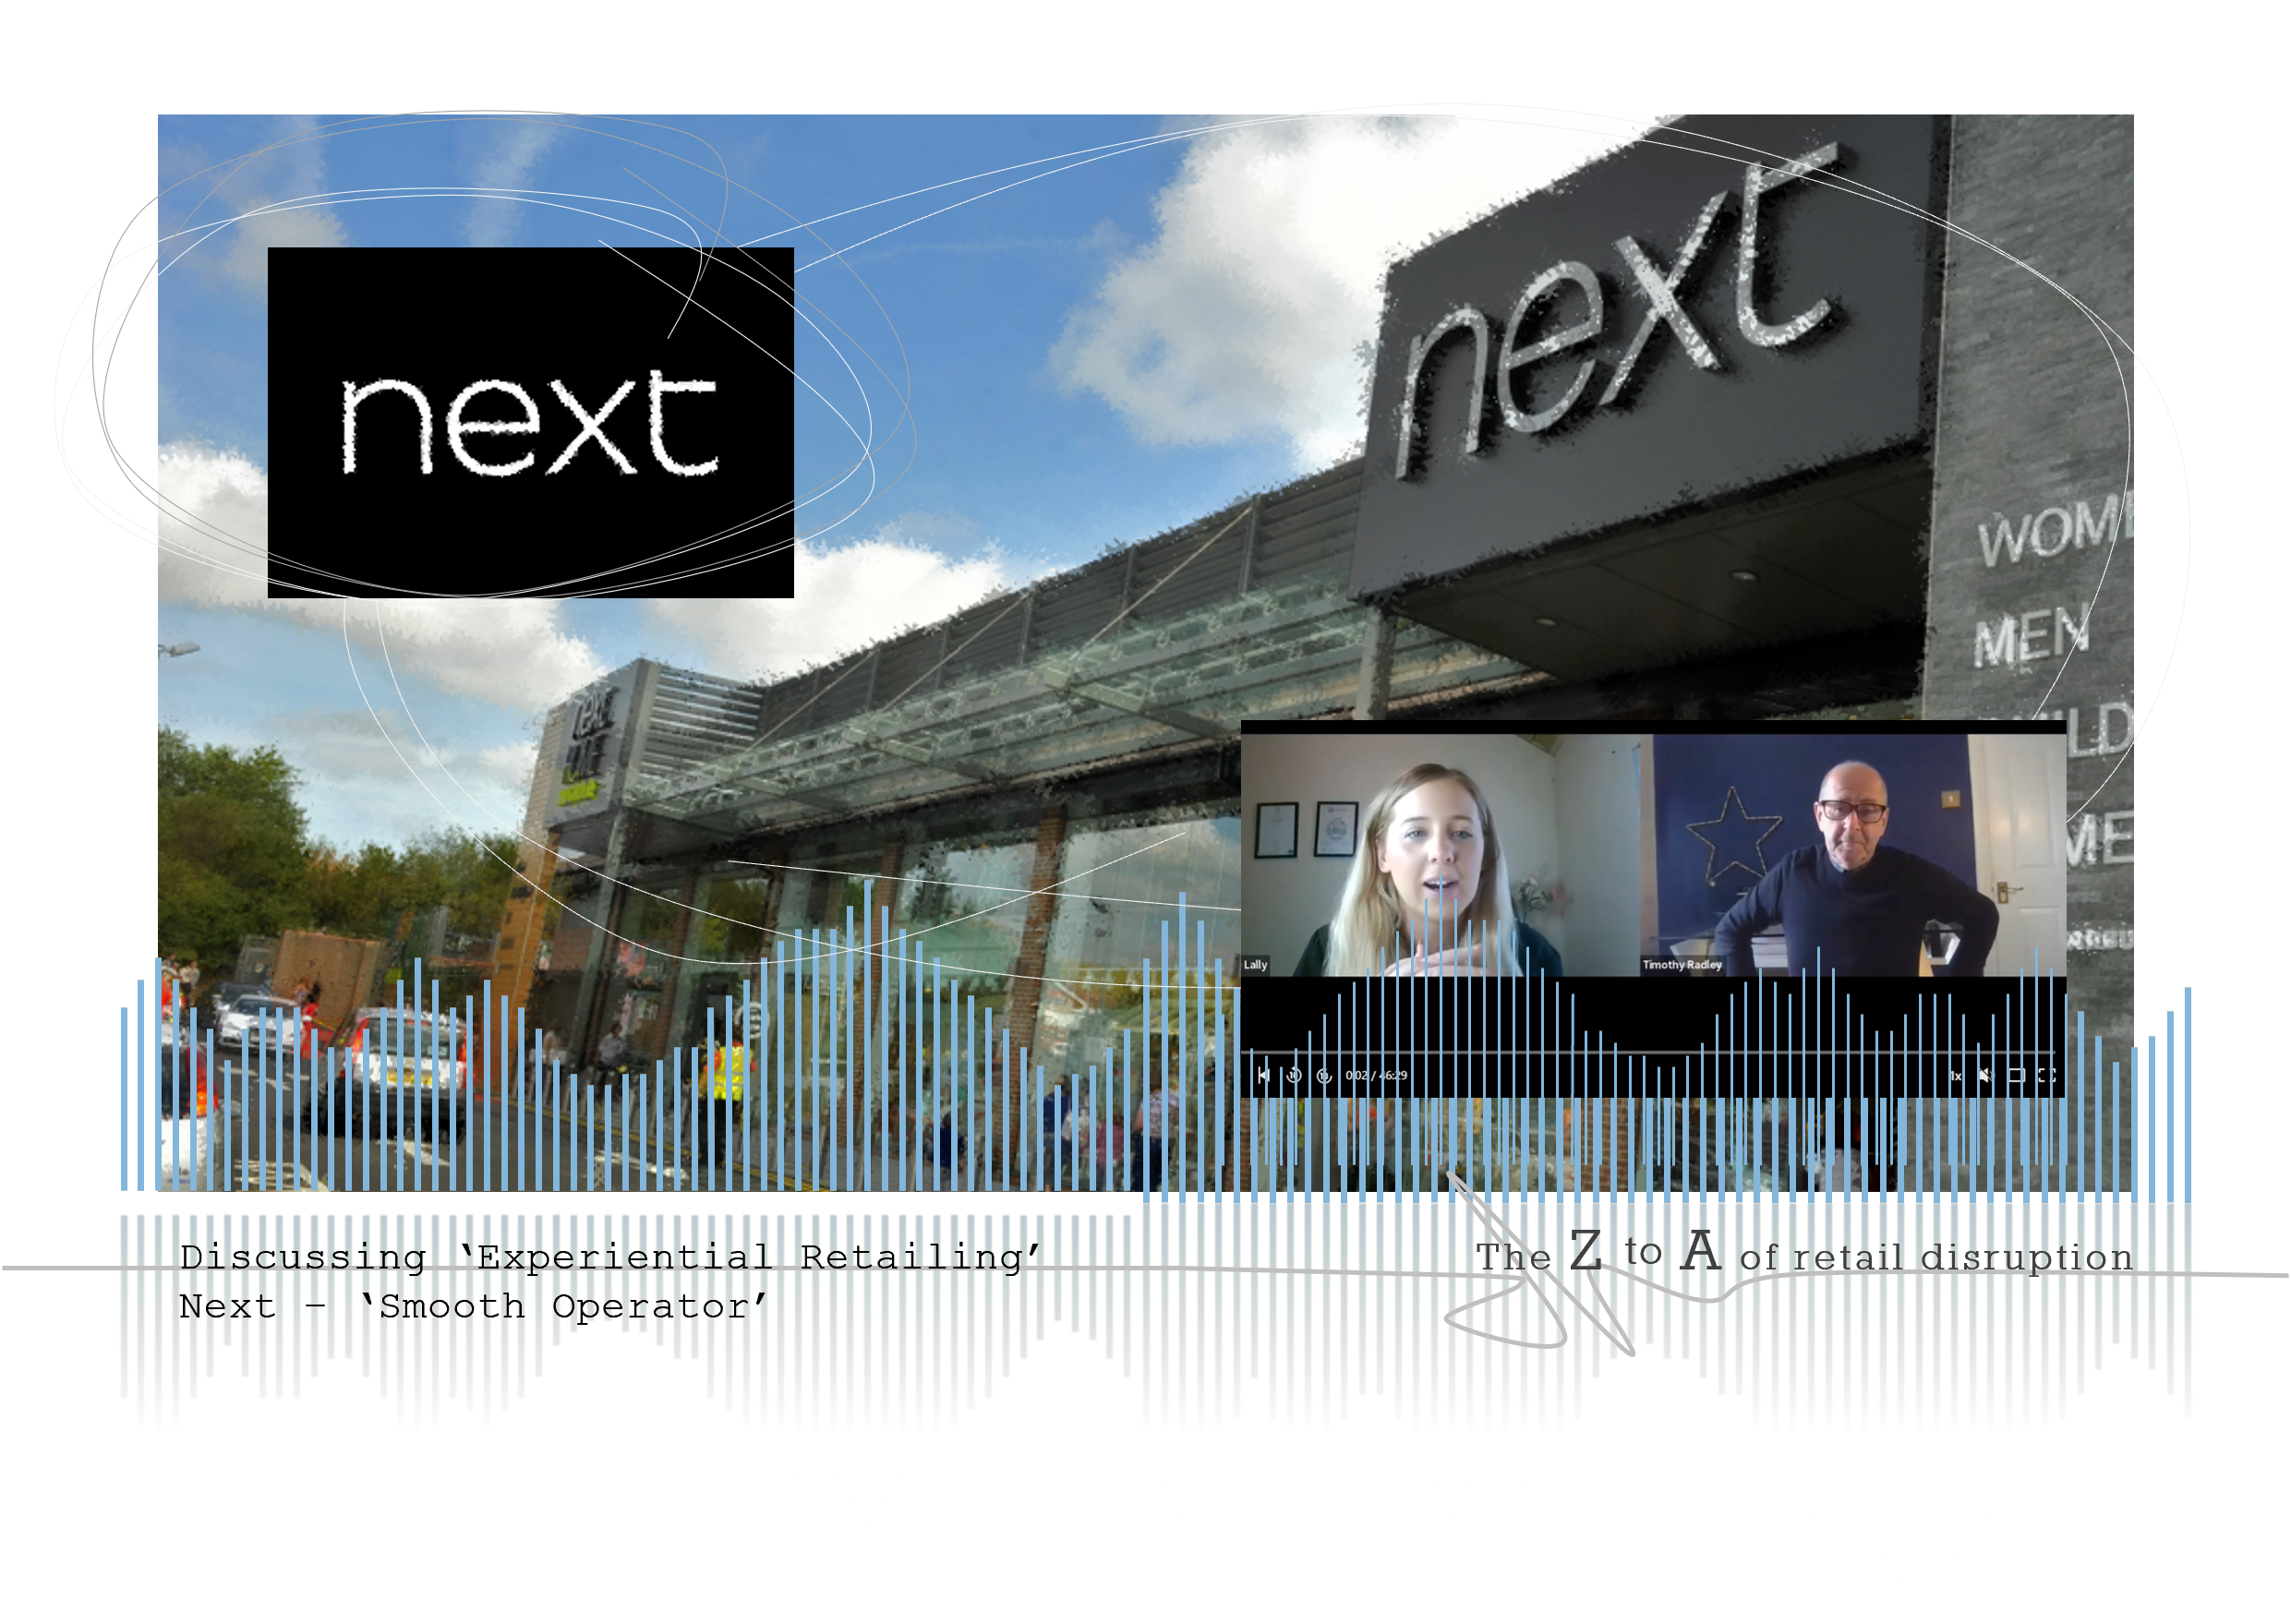 Discussing ‘Experiential Retailing’: Next – ‘The Smooth Operator’